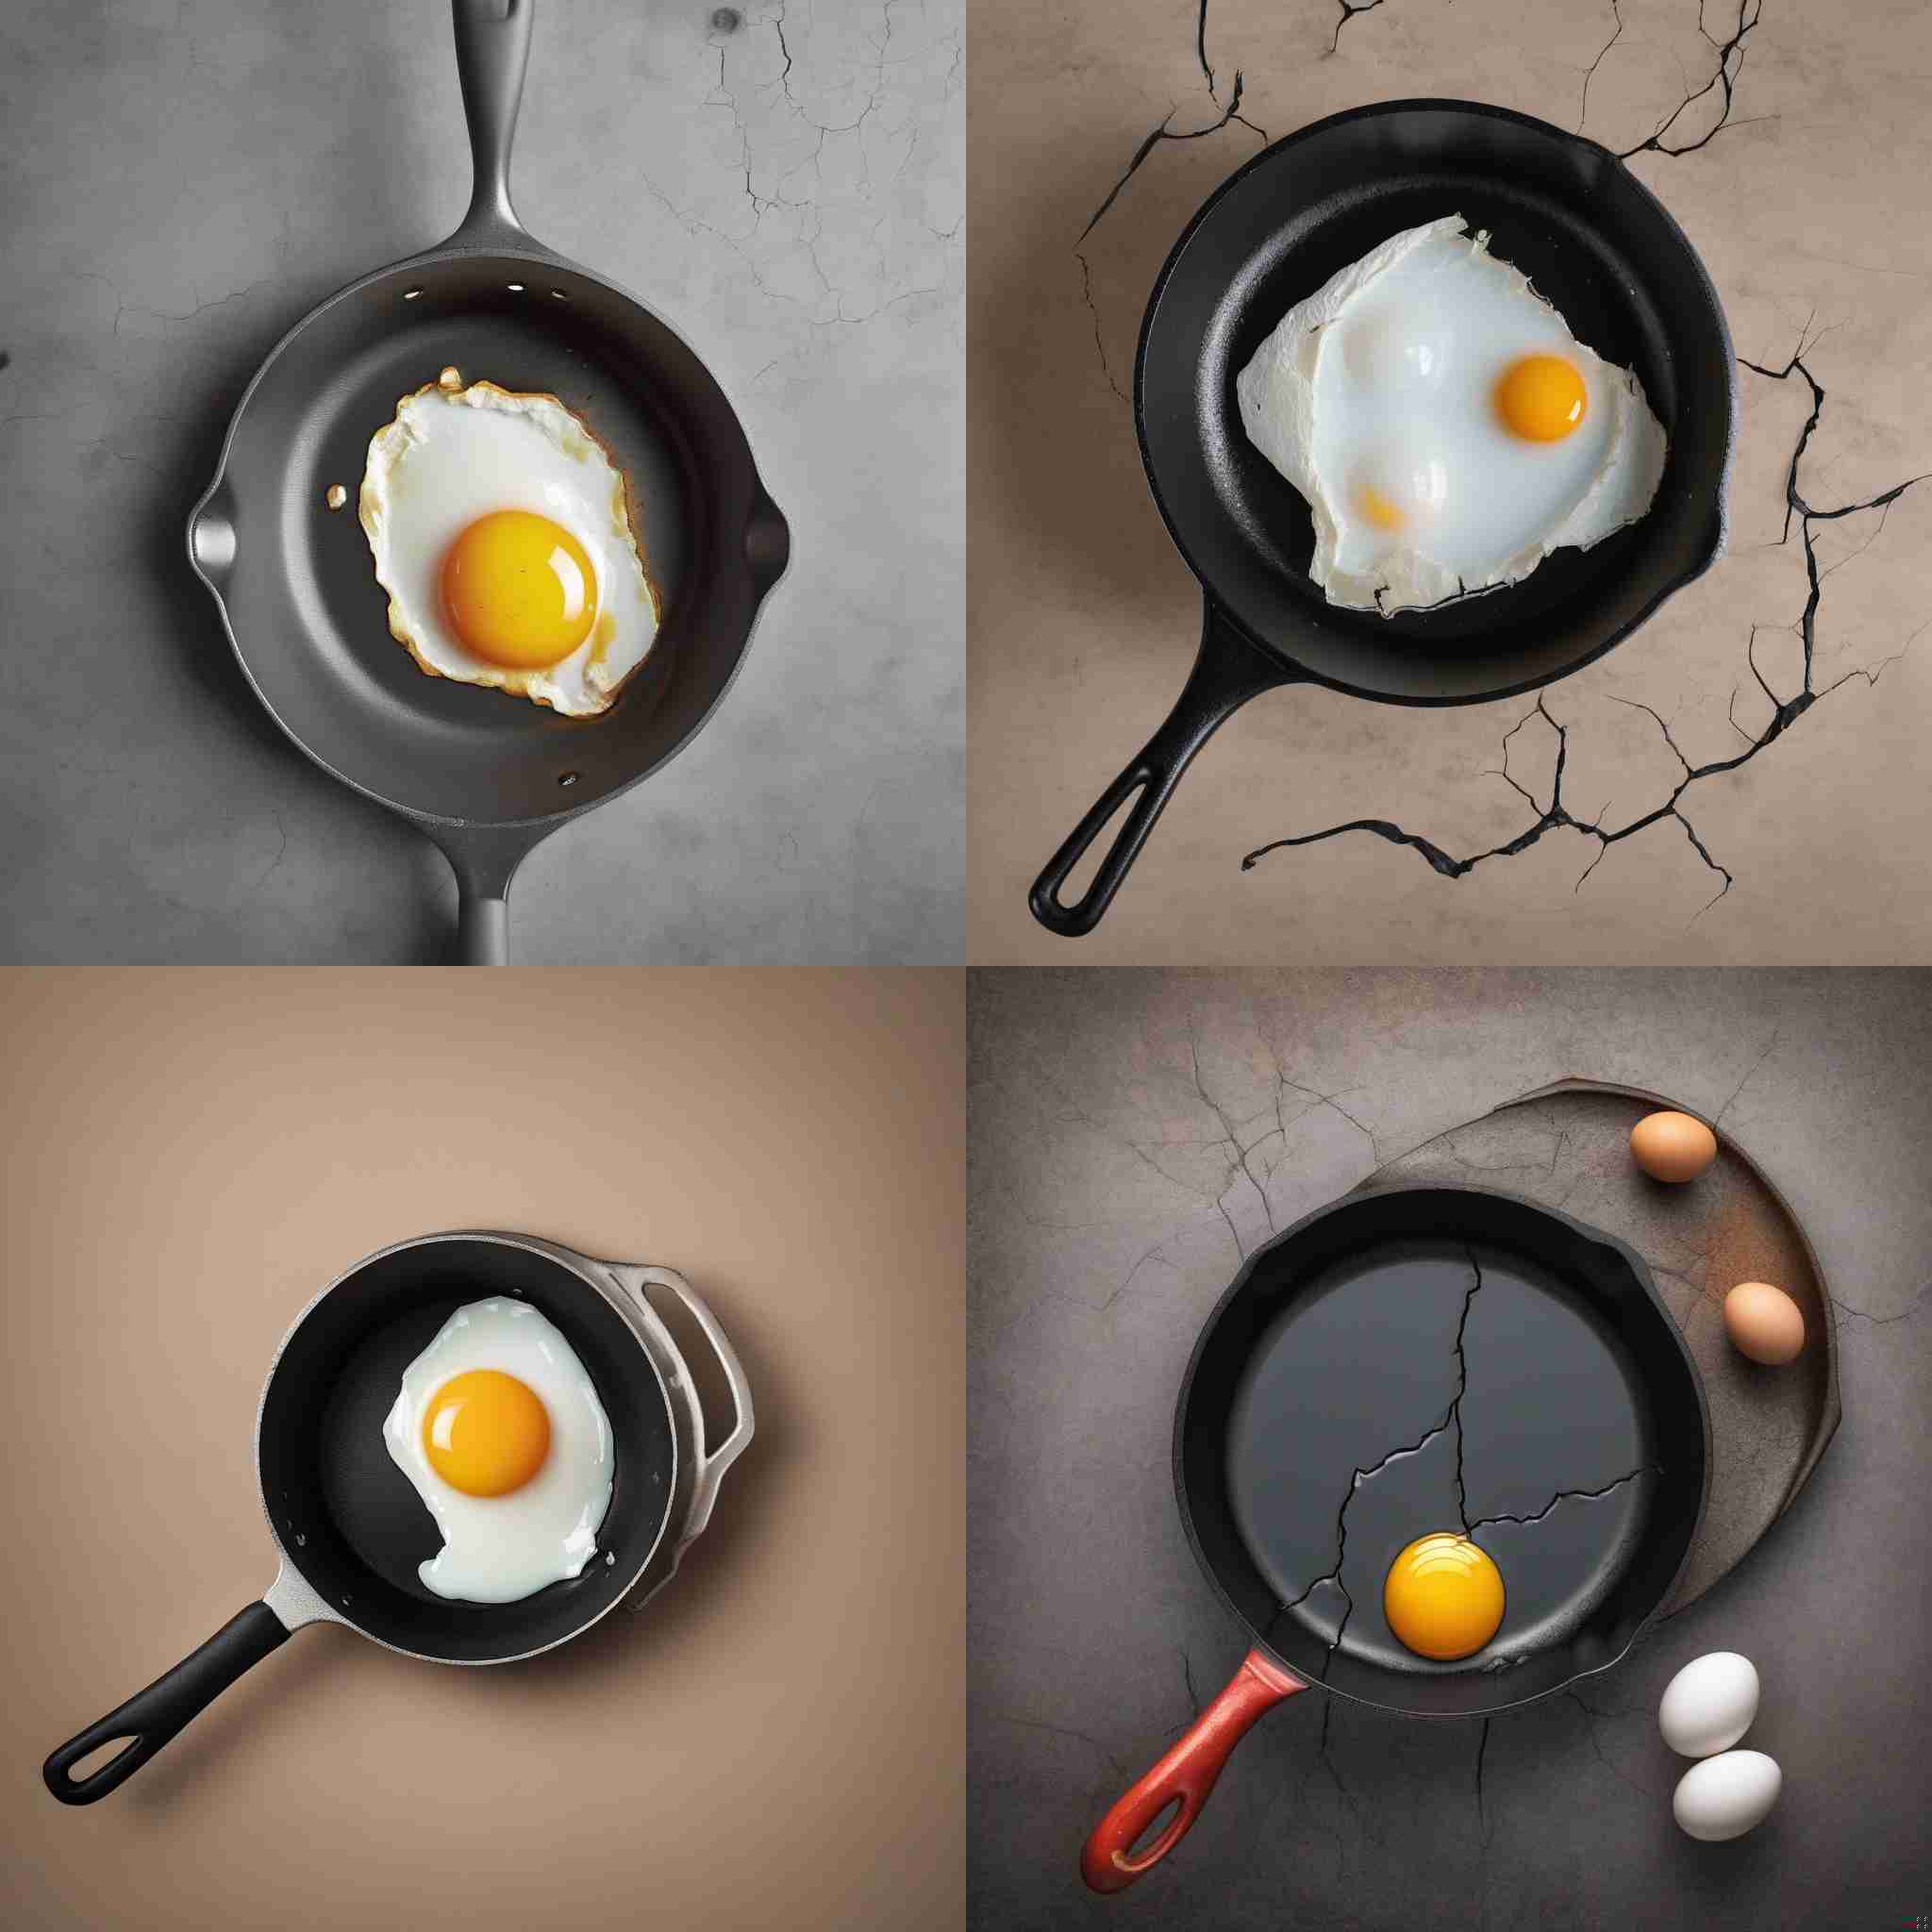 A cracked egg in a hot pan